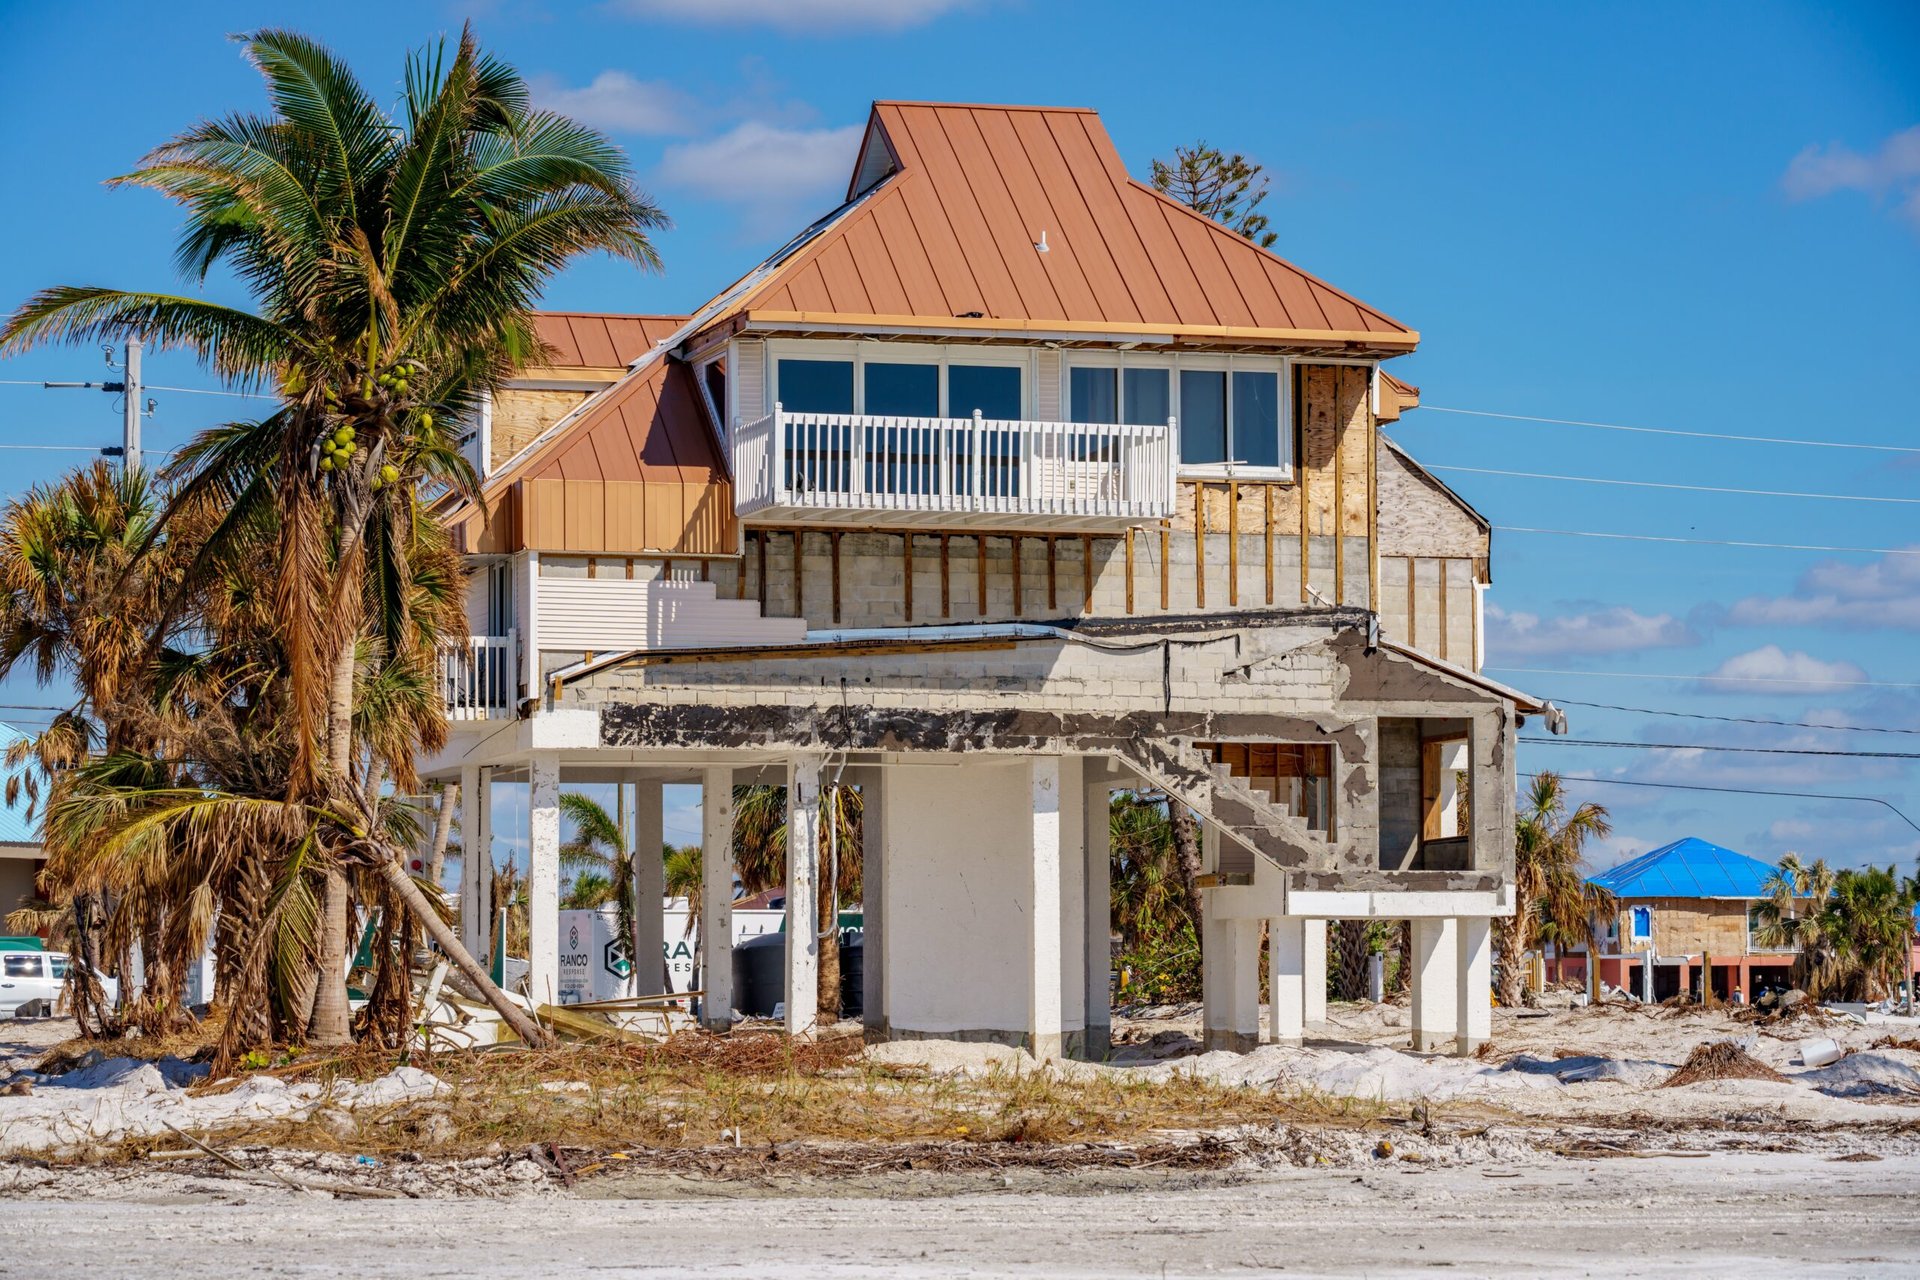 Home in Fort Myers, Florida, damaged by Hurricane Ian.